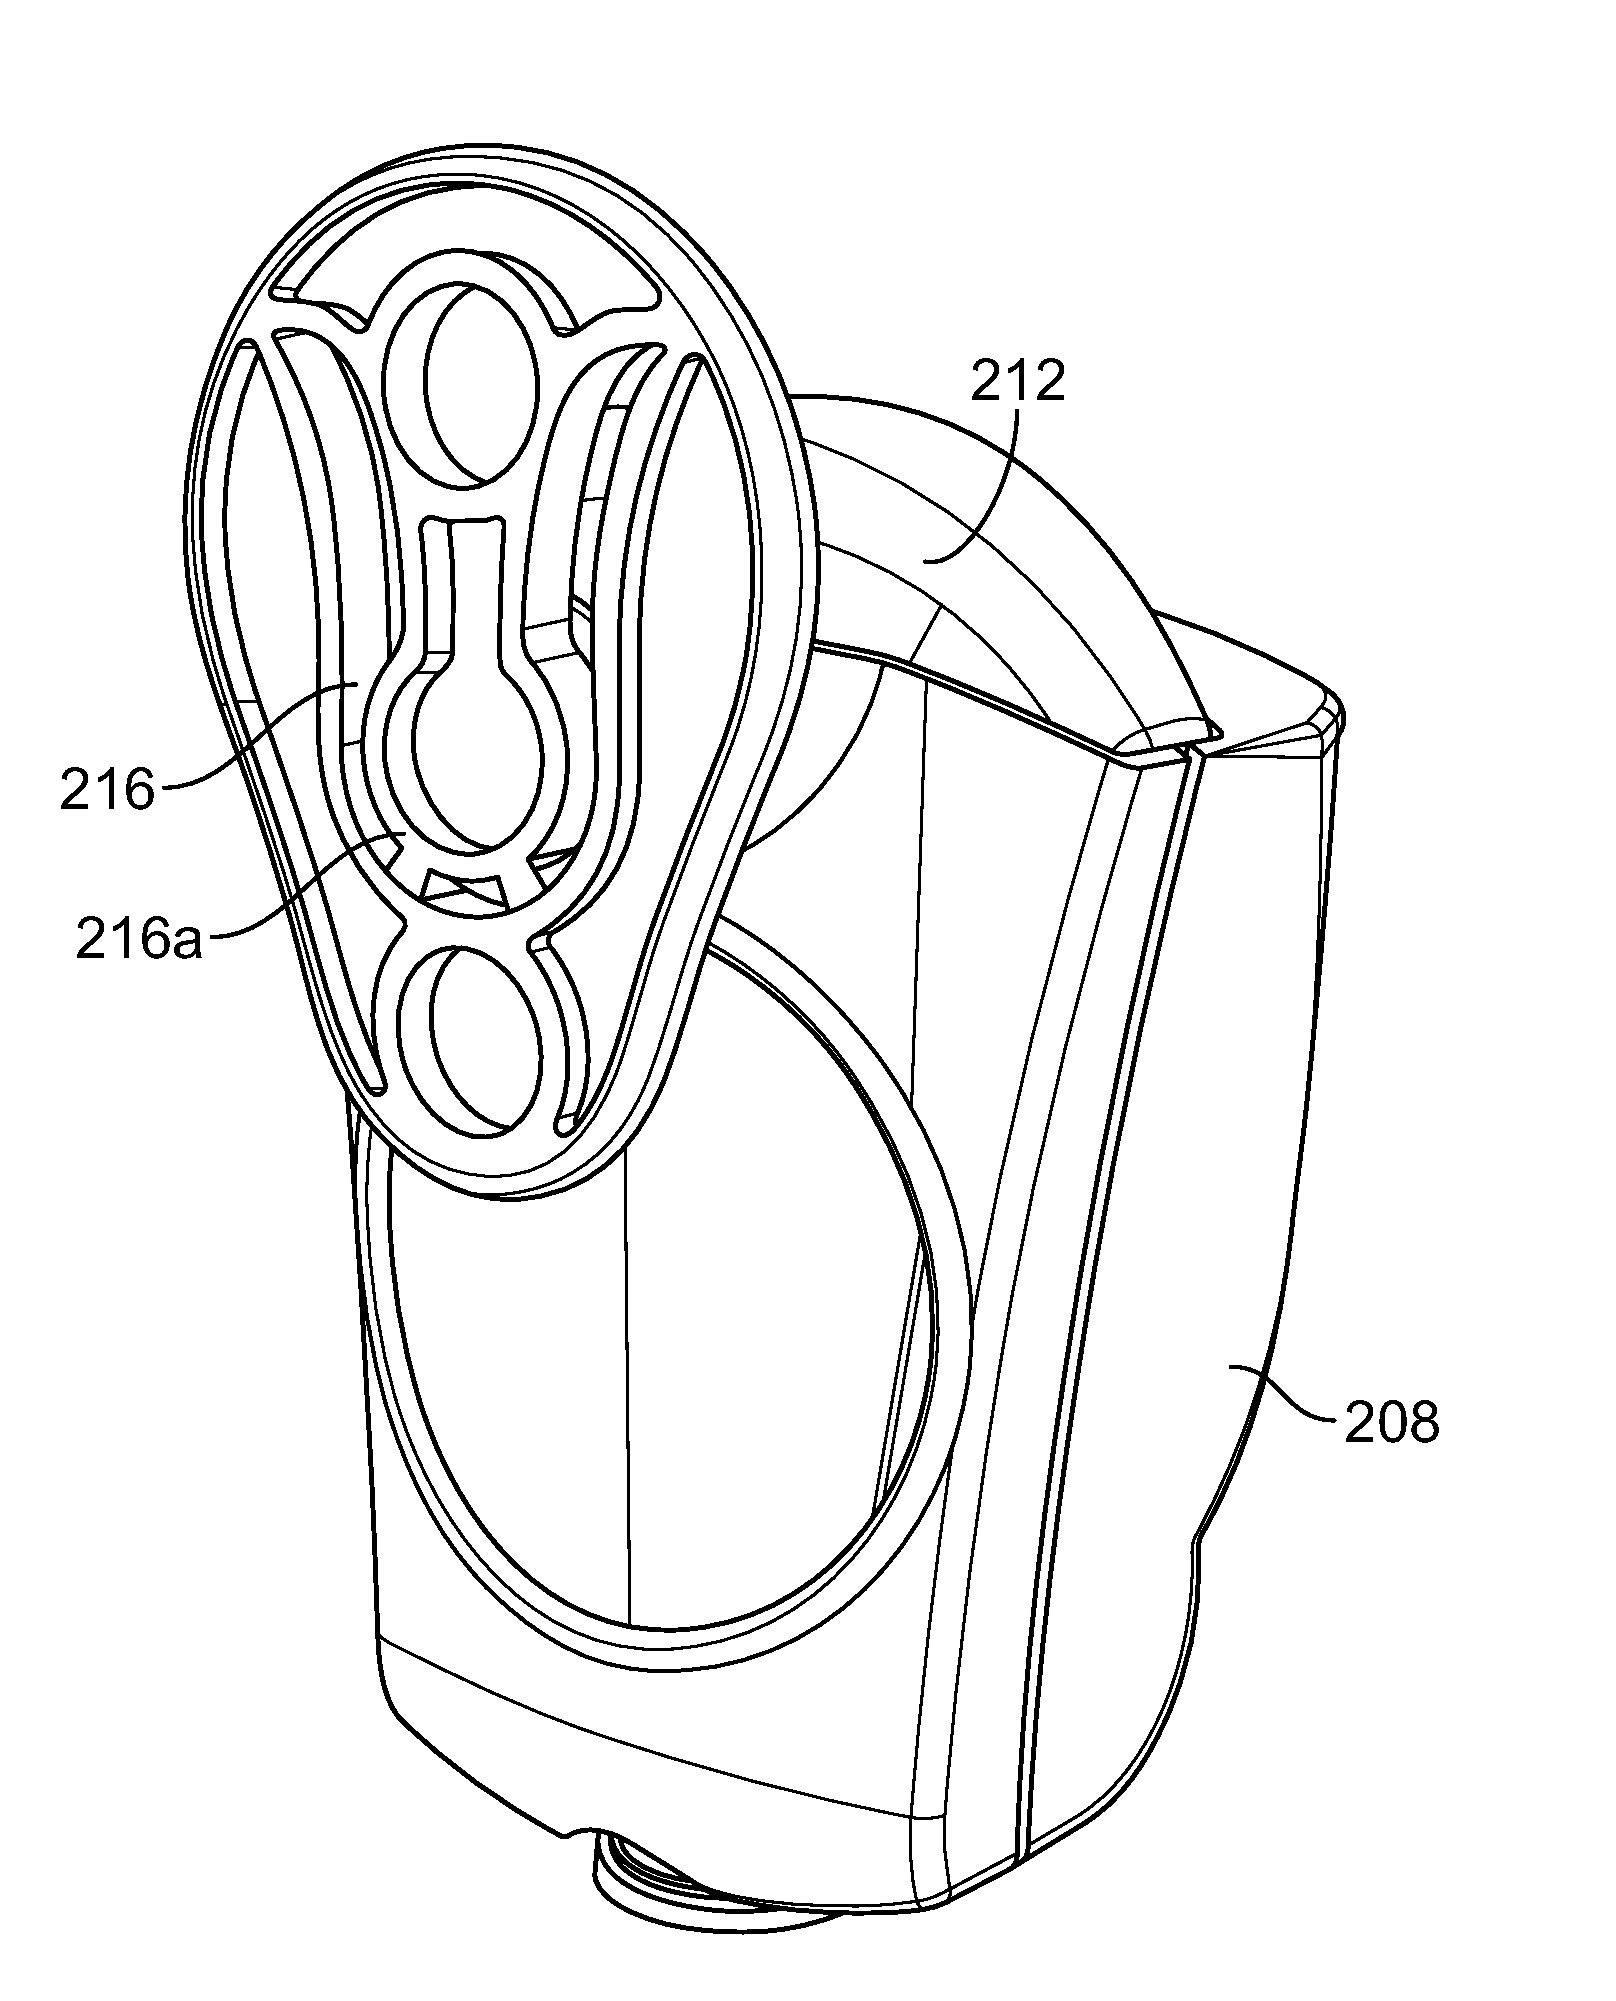 Method and system for ensuring and tracking hand hygiene compliance